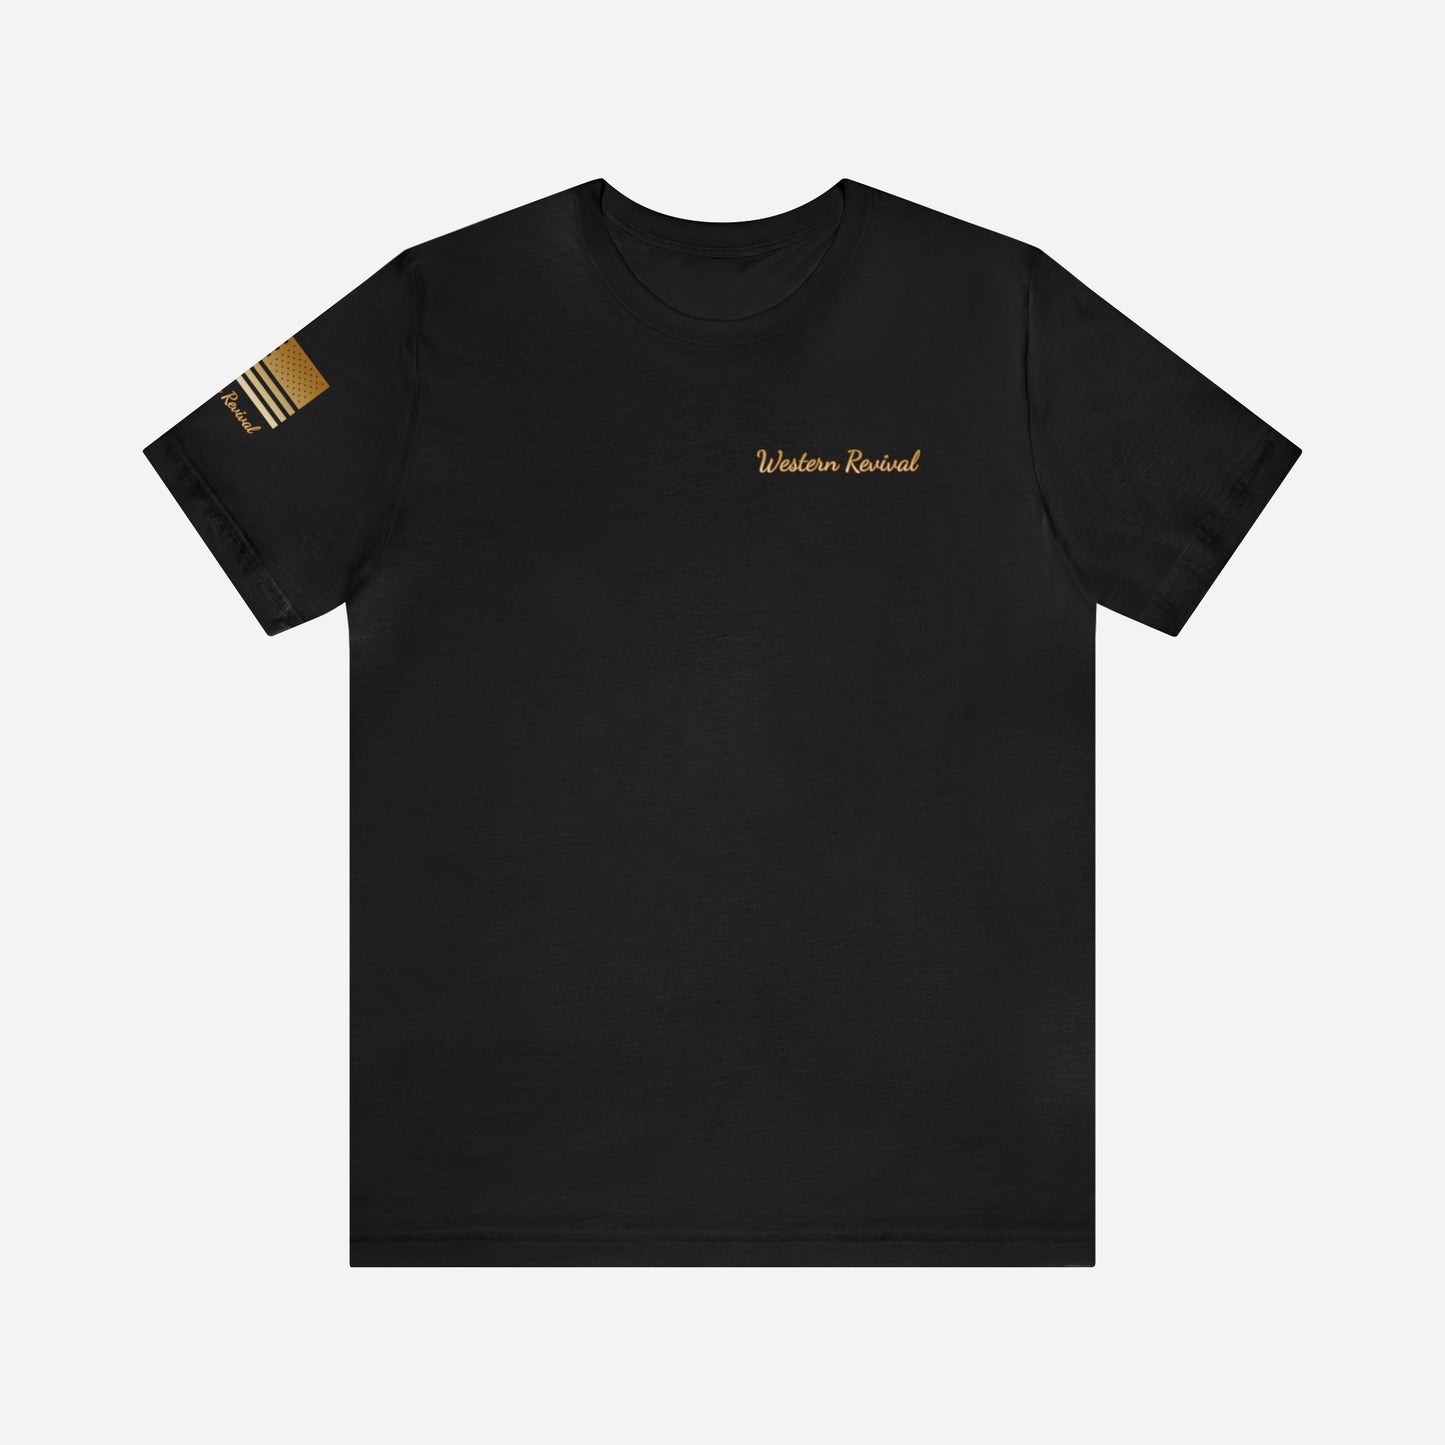 Rodeo State of Mind - Tee